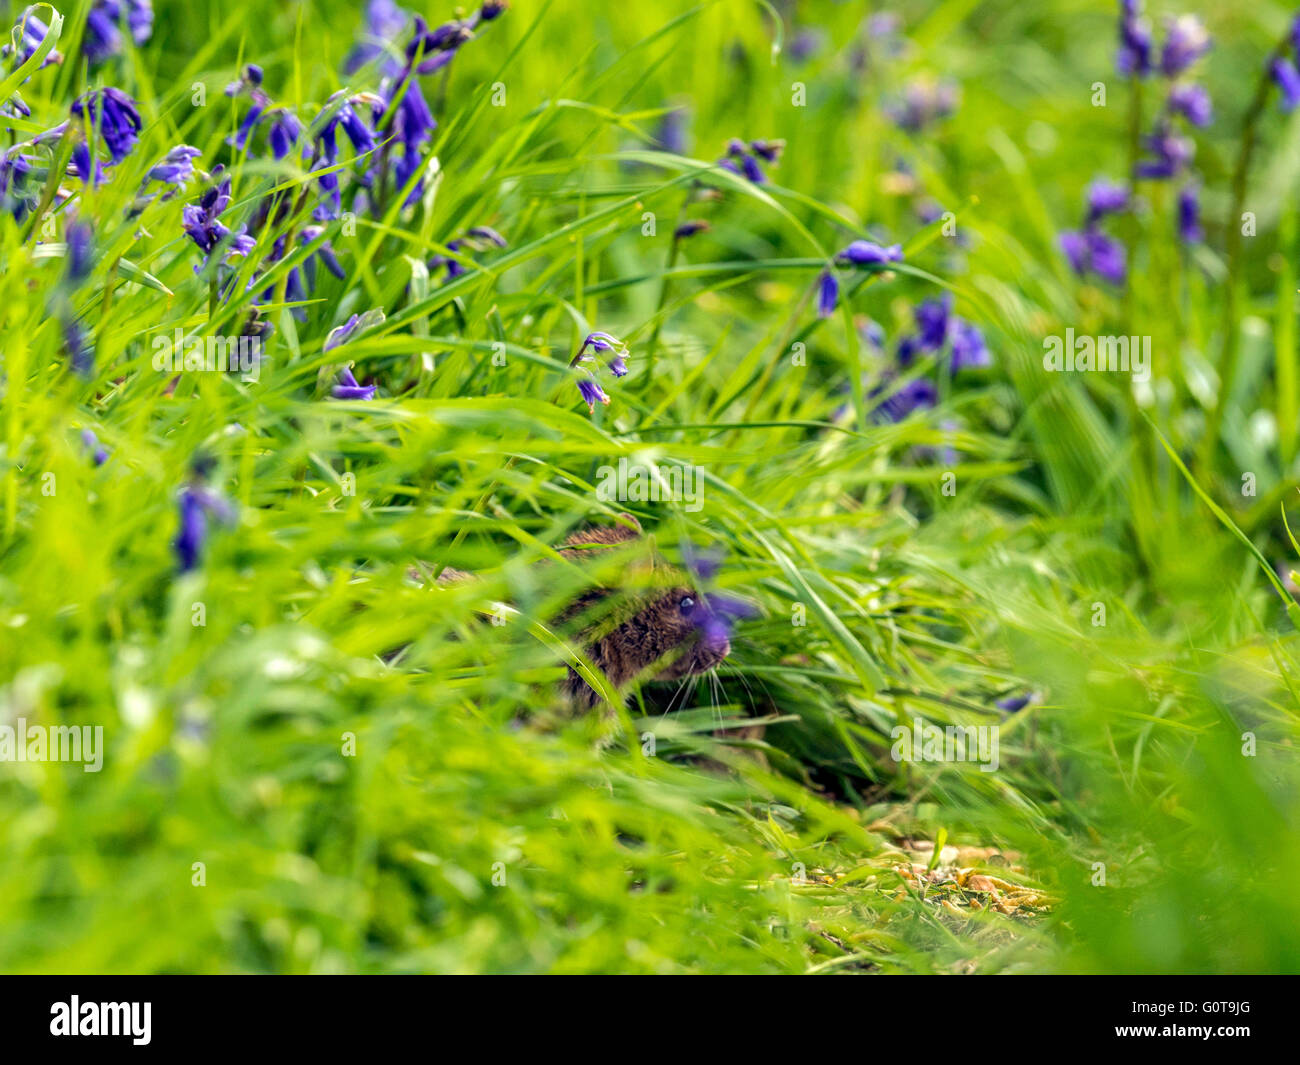 Shy wood mouse or murid rodent (Apodemus sylvaticus) foraging amongst BlueBells in long green grass in woodland setting. Stock Photo